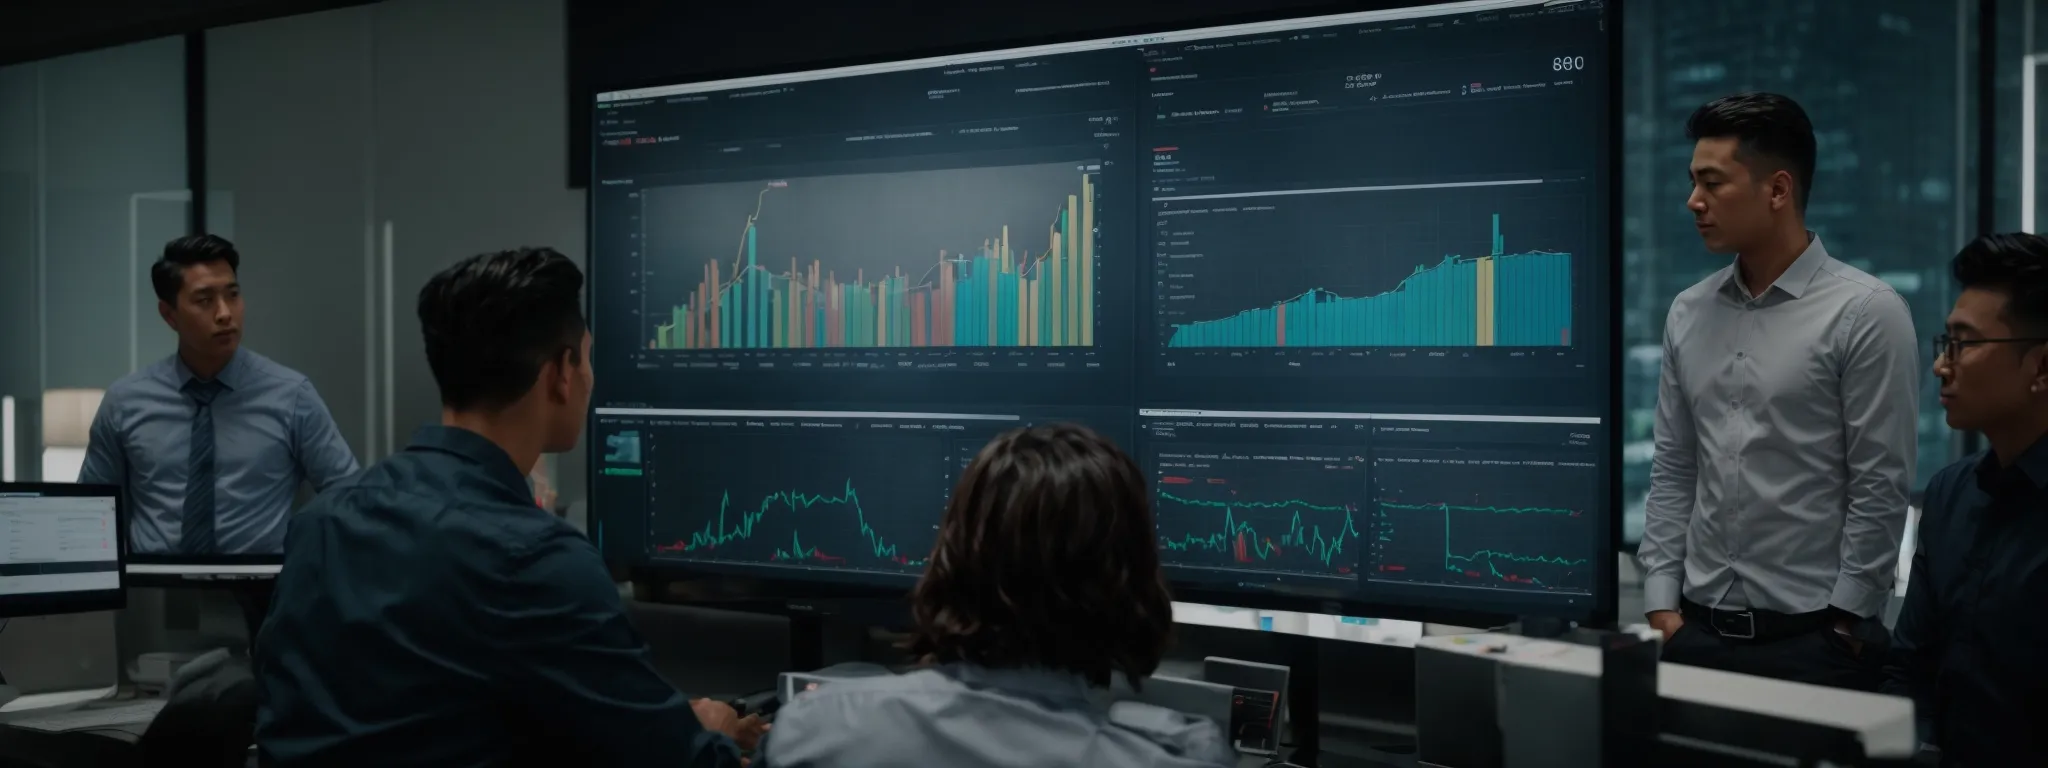 a marketing team reviews a bright, interactive analytics dashboard on a large monitor.